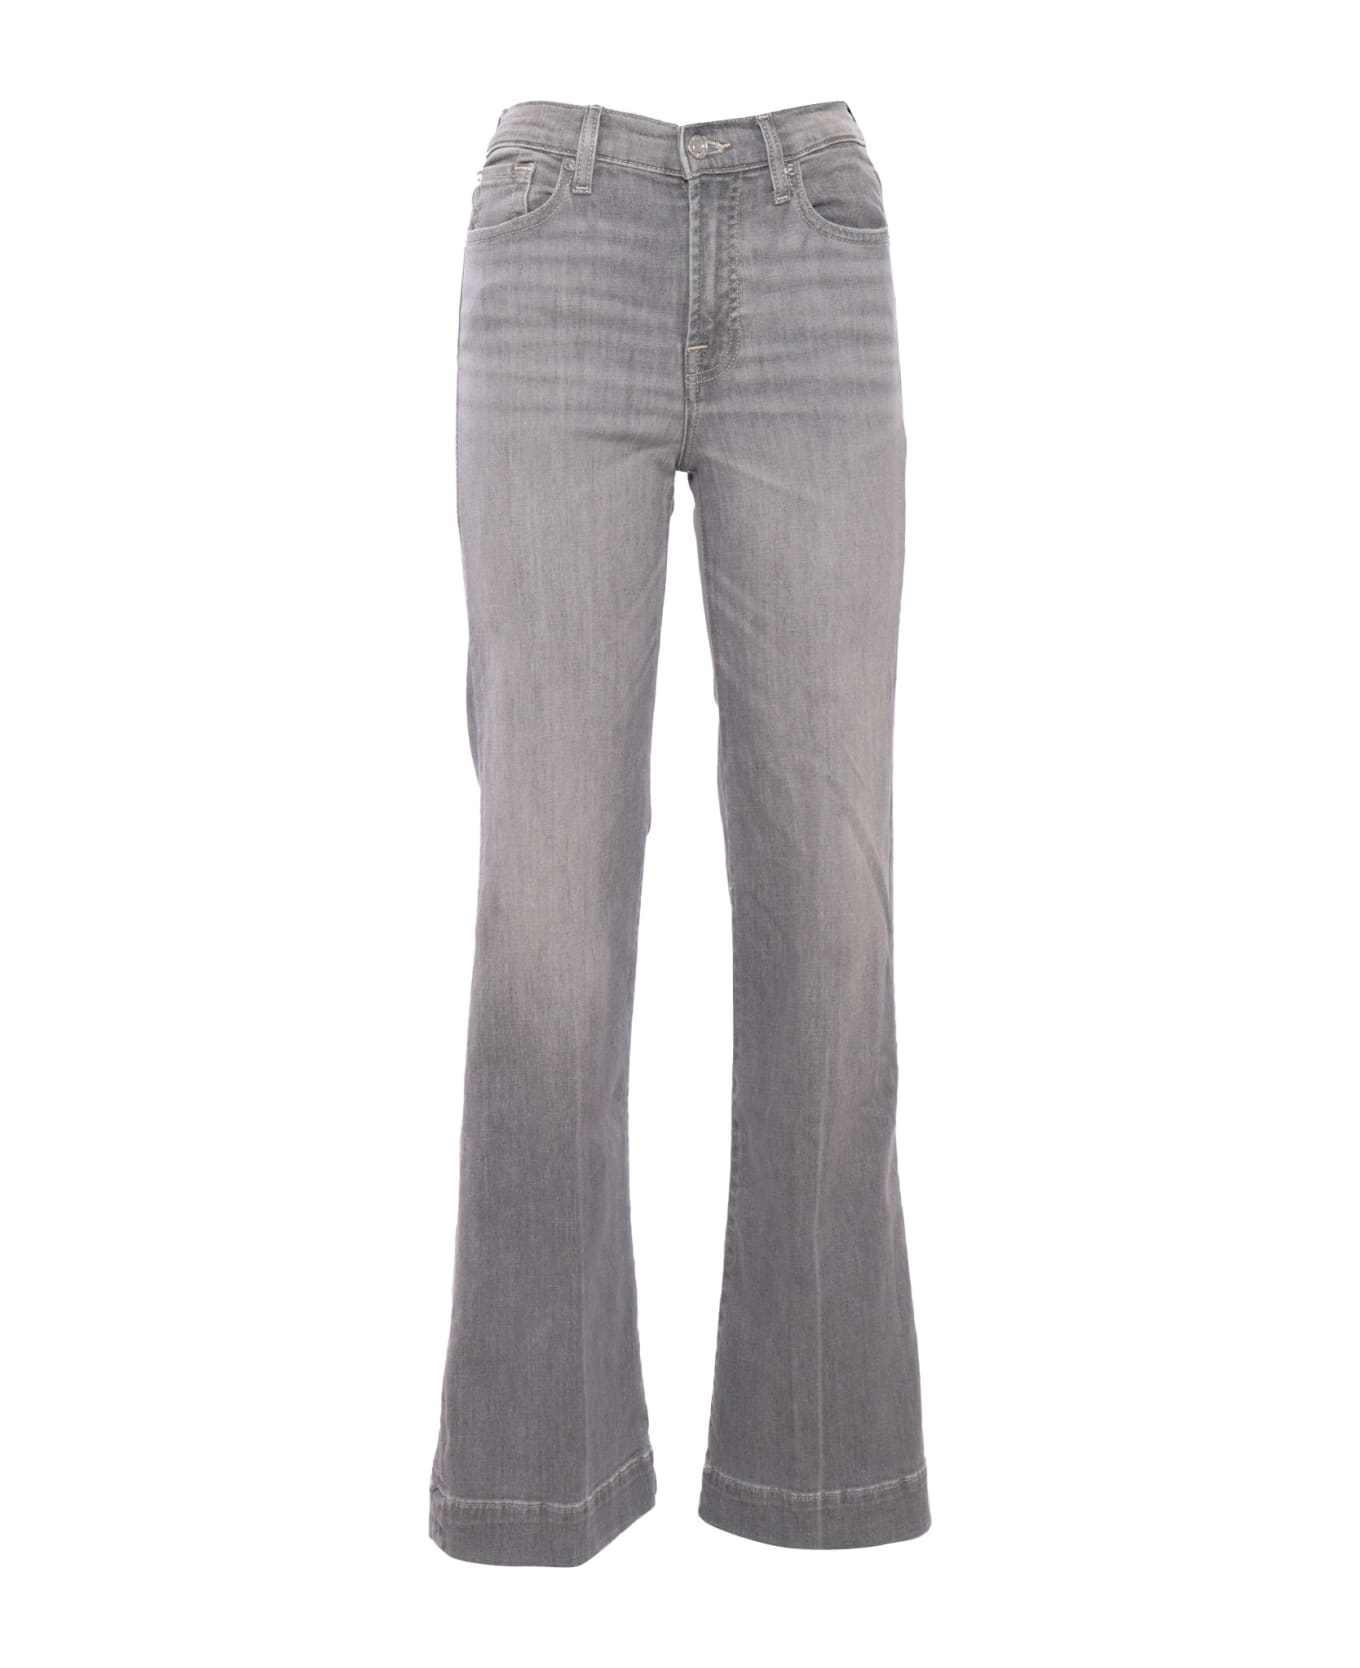 7 For All Mankind Women's Flared Jeans - GREY デニム